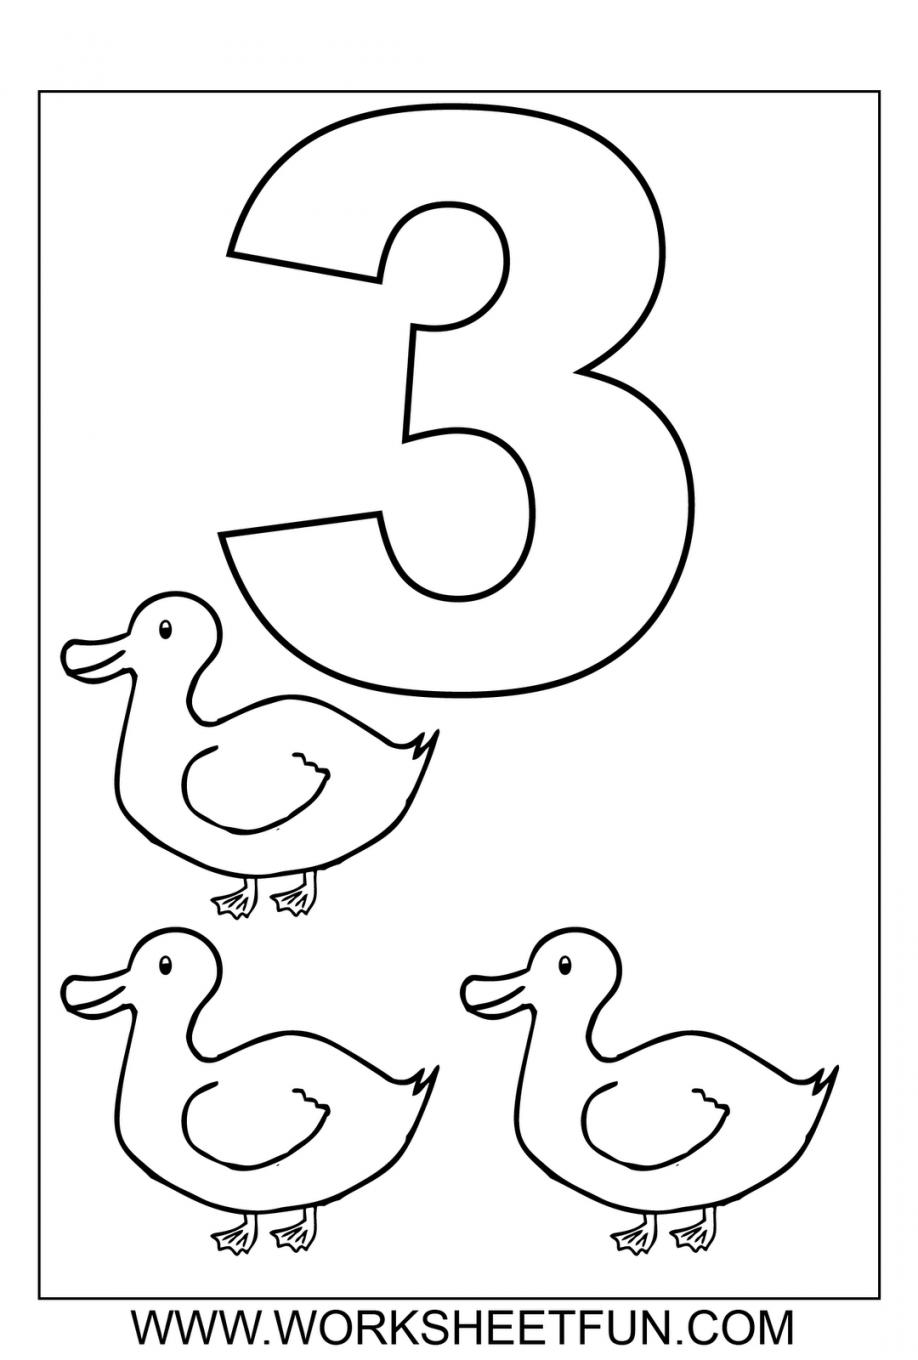 Number Coloring Page 43 Cool Coloring Page